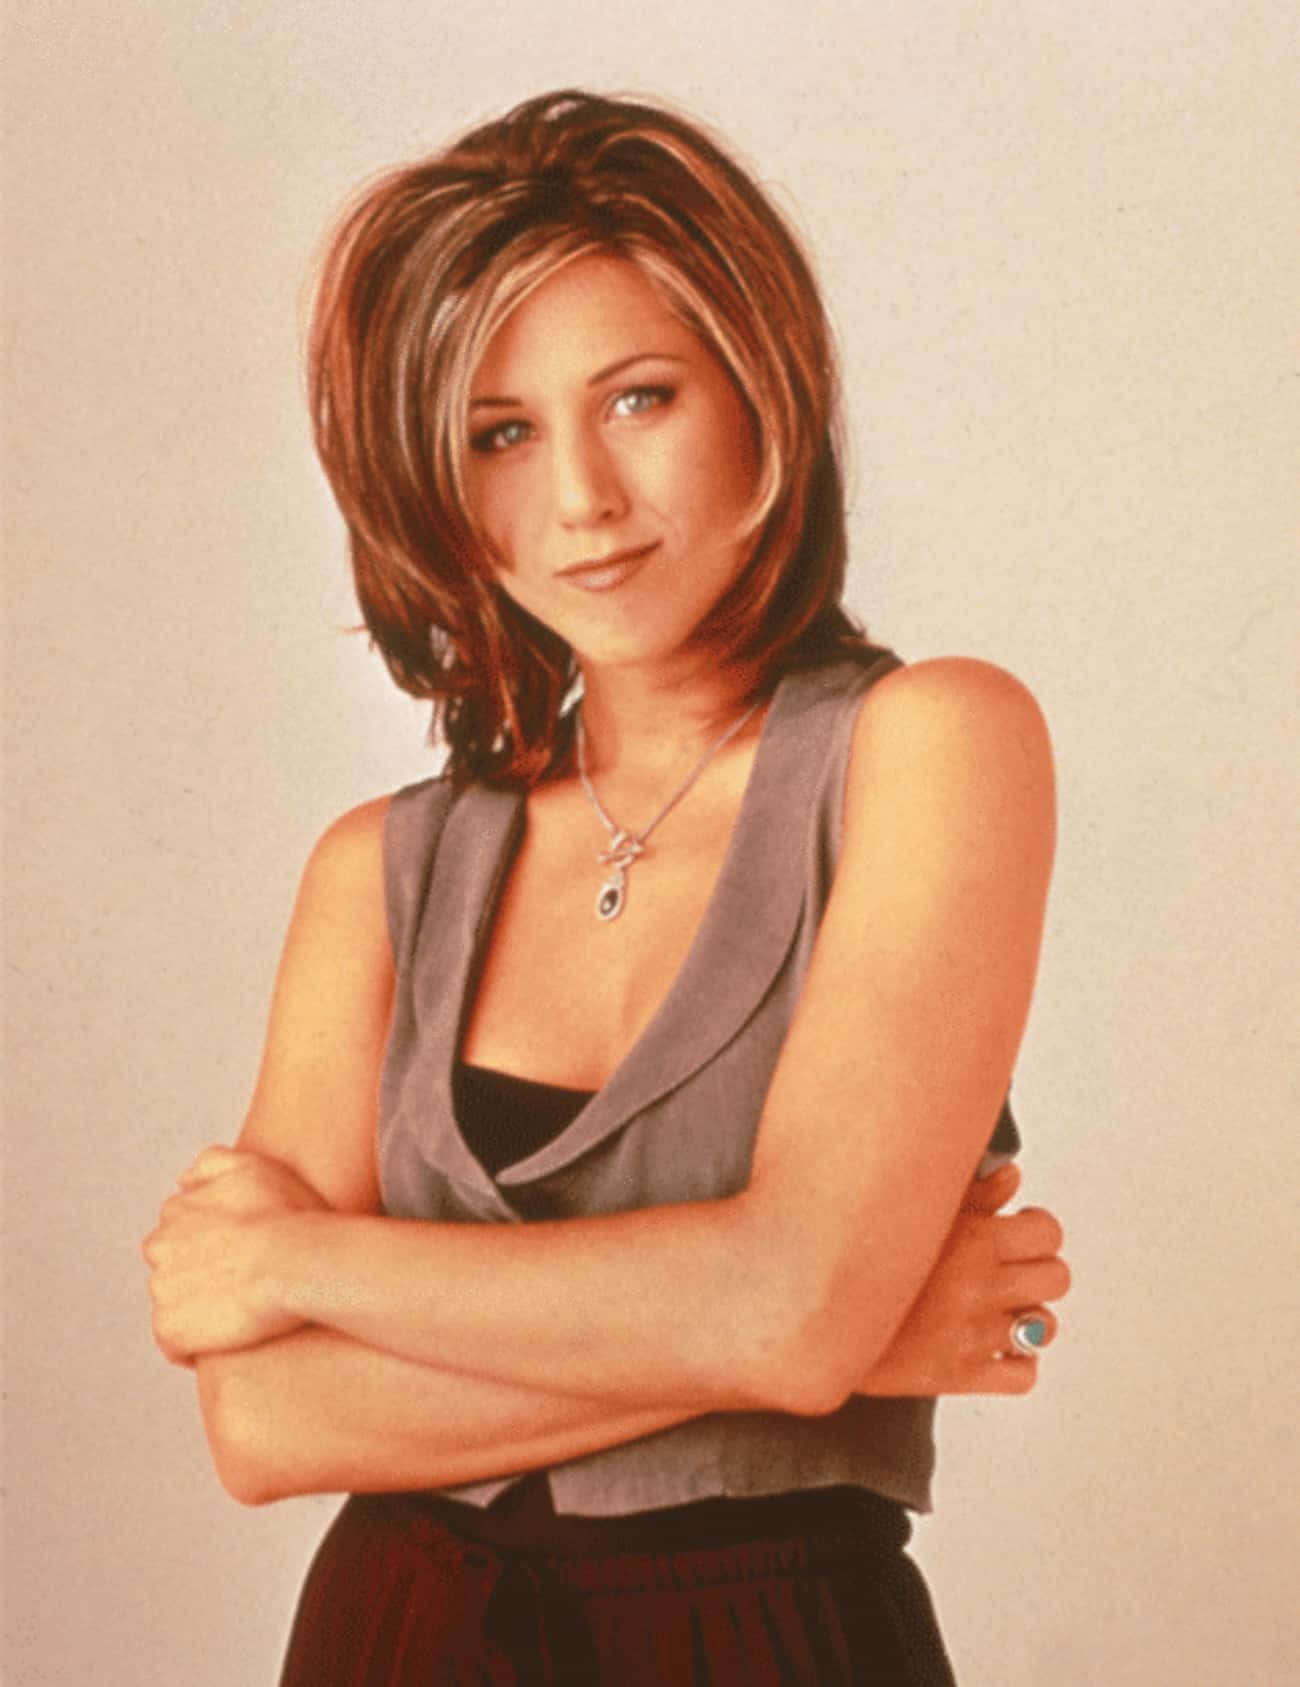 Young Jennifer Aniston on the Set of Friends